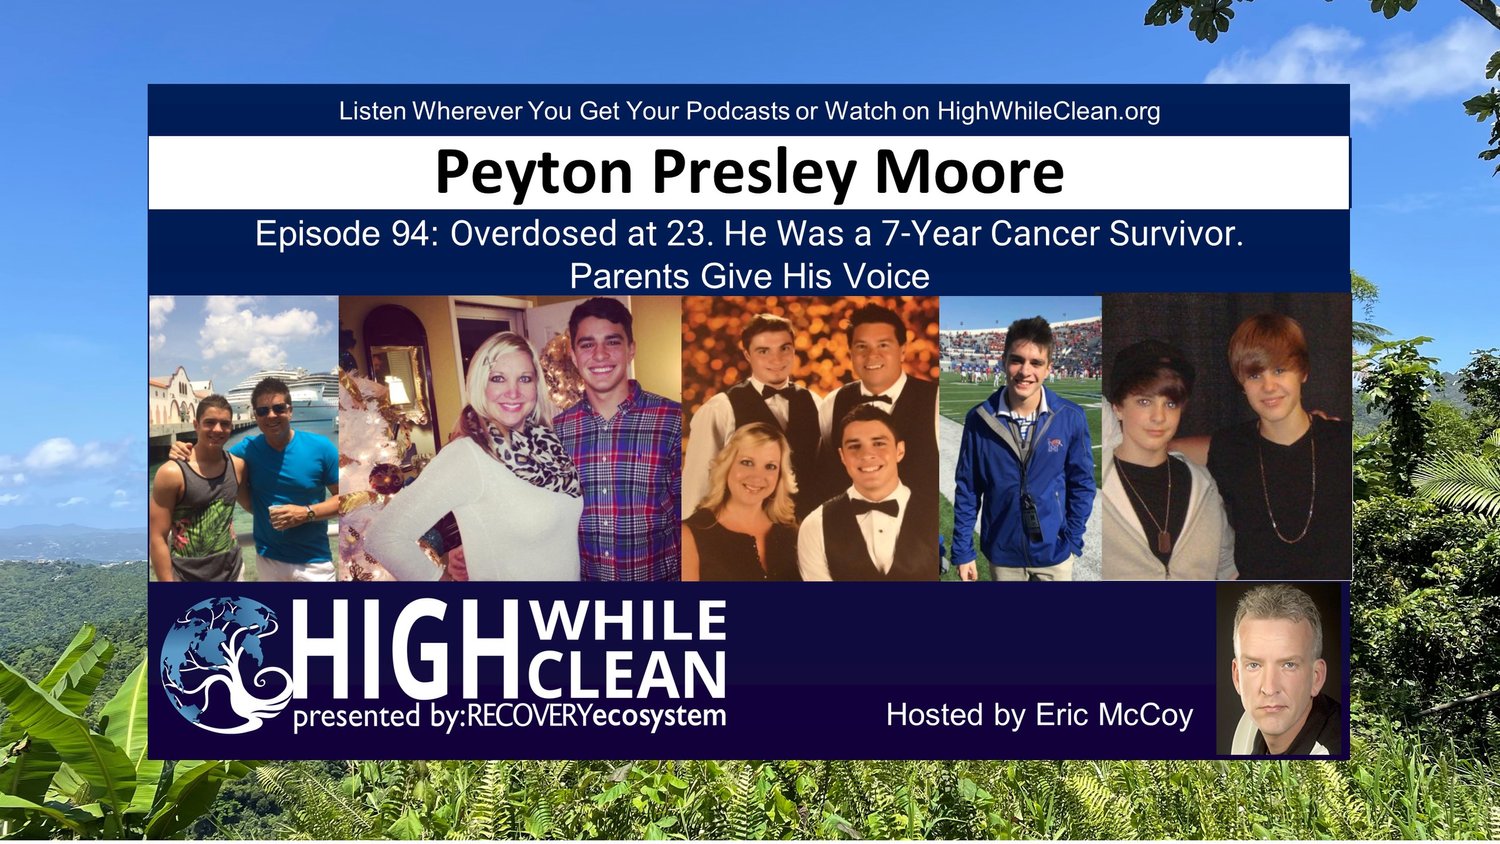 Episode 094: Peyton Presley Moore: Overdosed at 23. He was a 7-year cancer survivor. Parents Give His Voice.